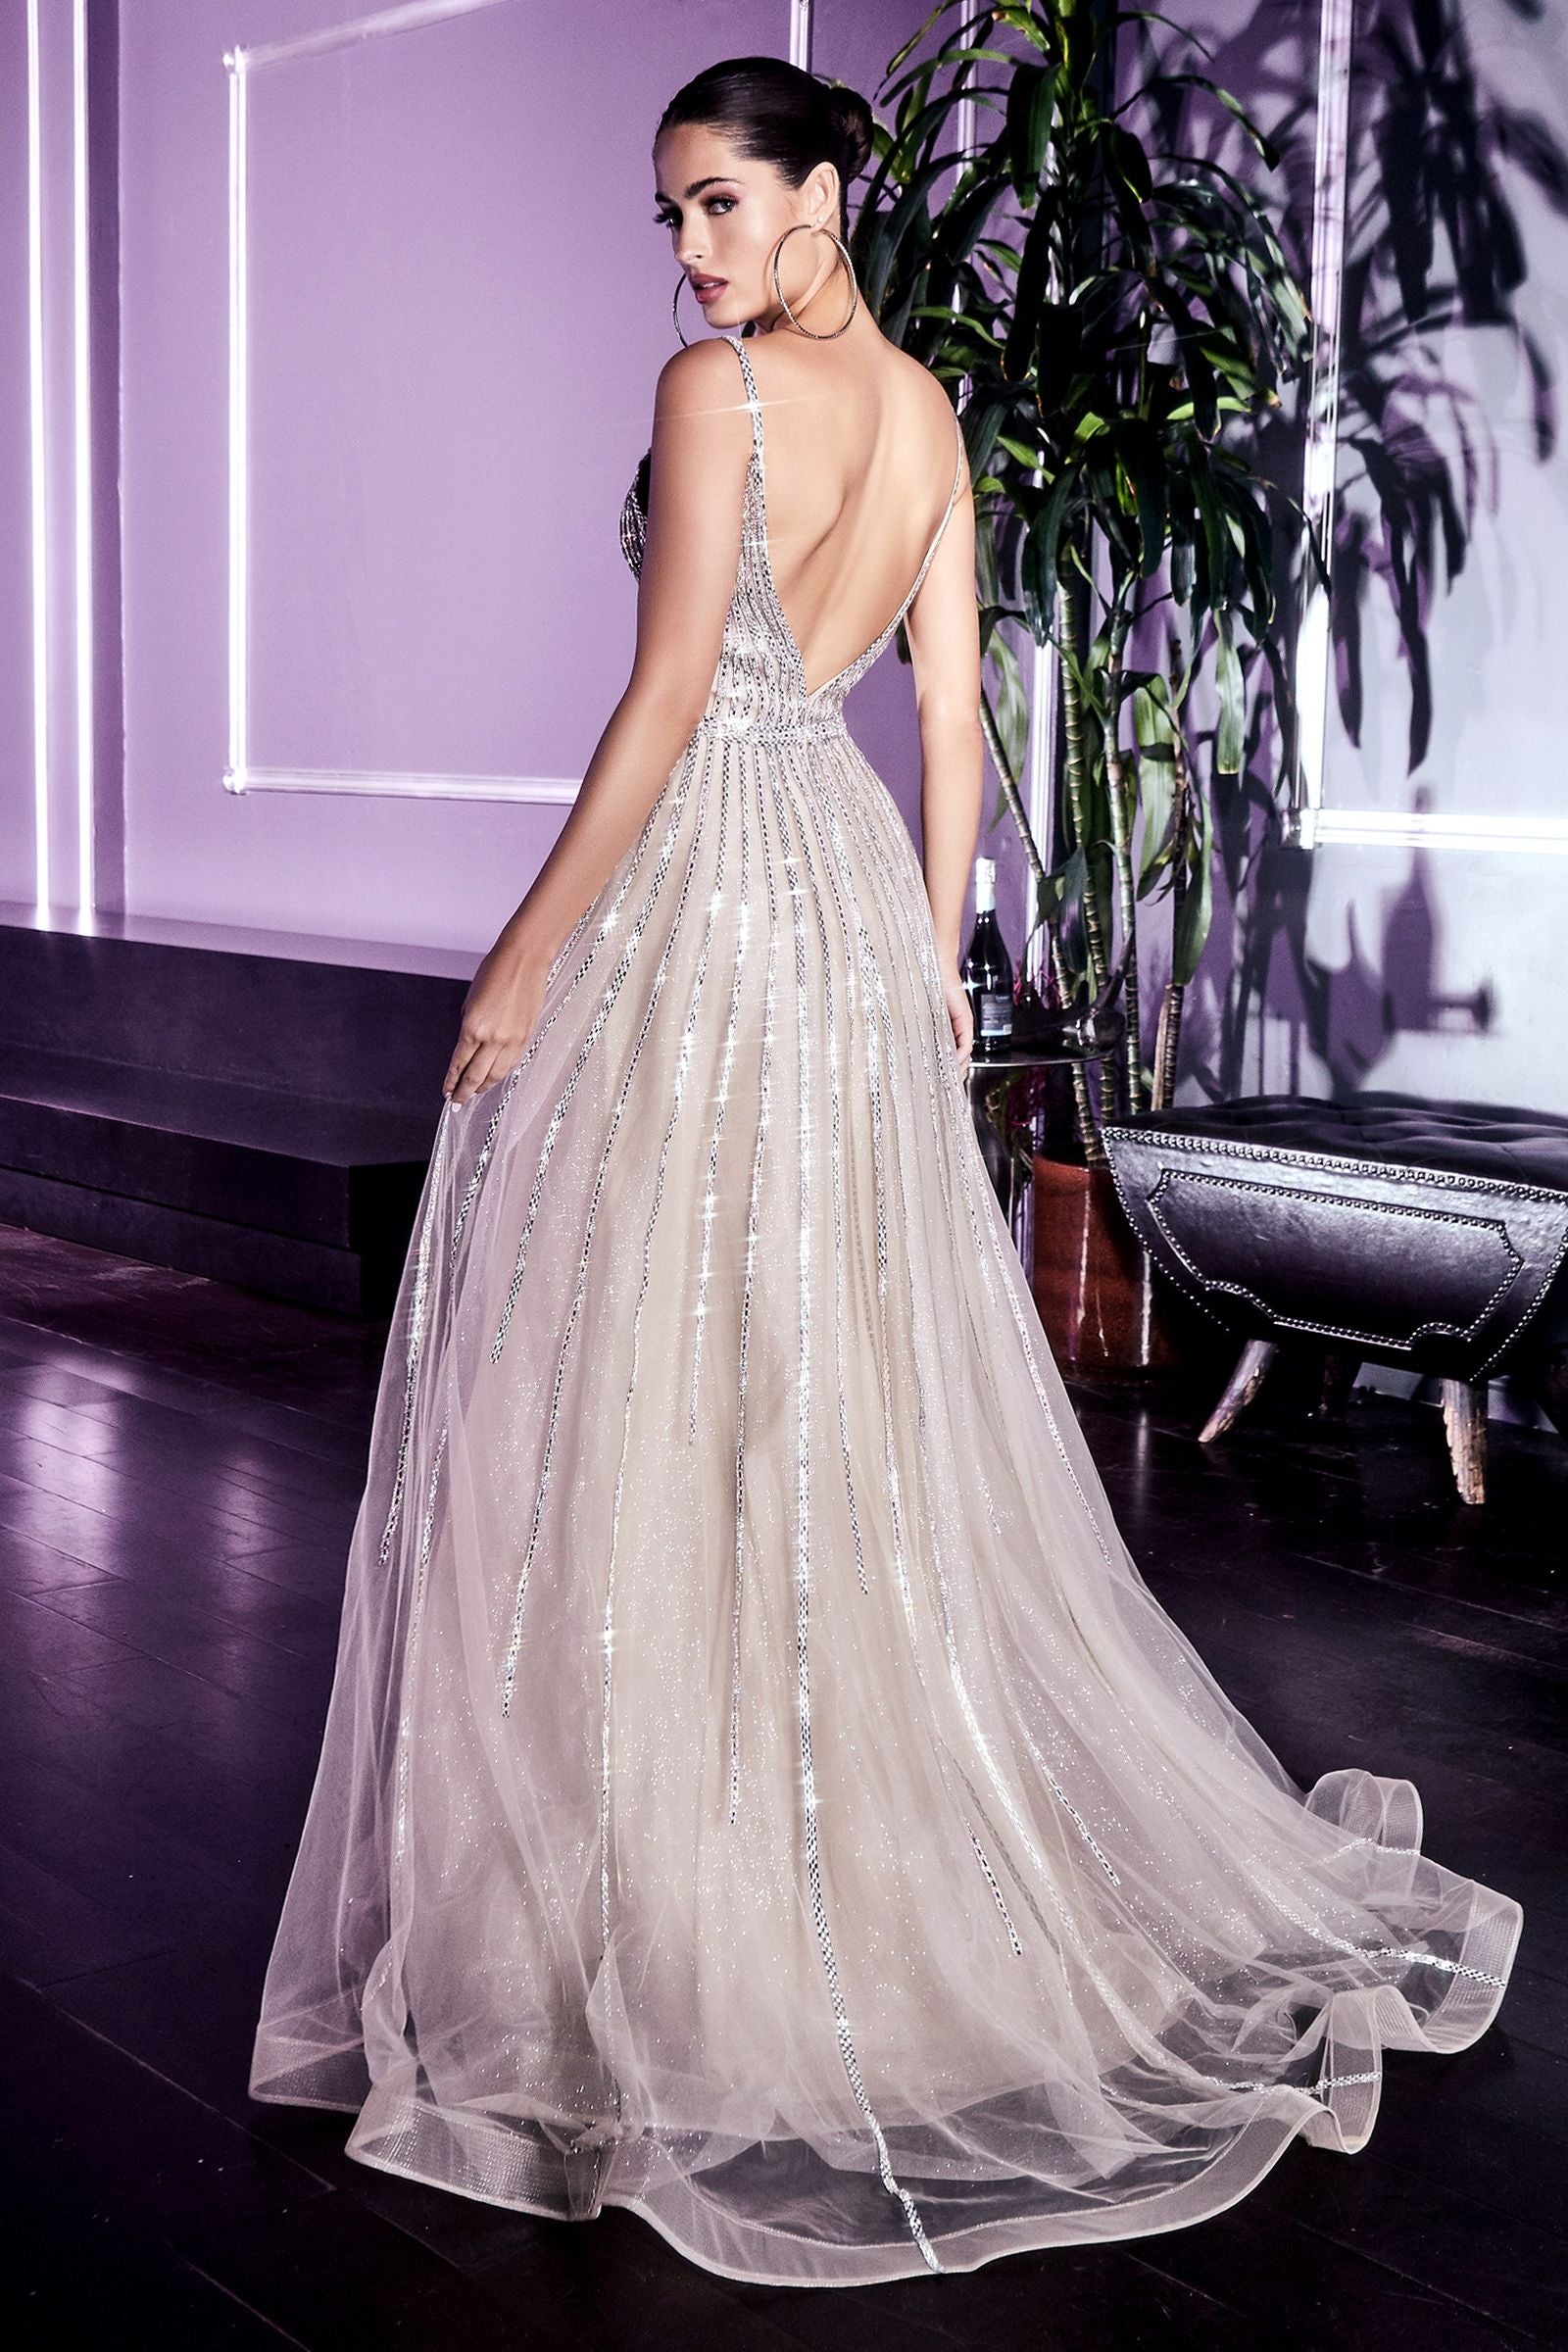 A back view of the Dazzling A-Line Tulle Gown, revealing its plunging back design for an alluring look.